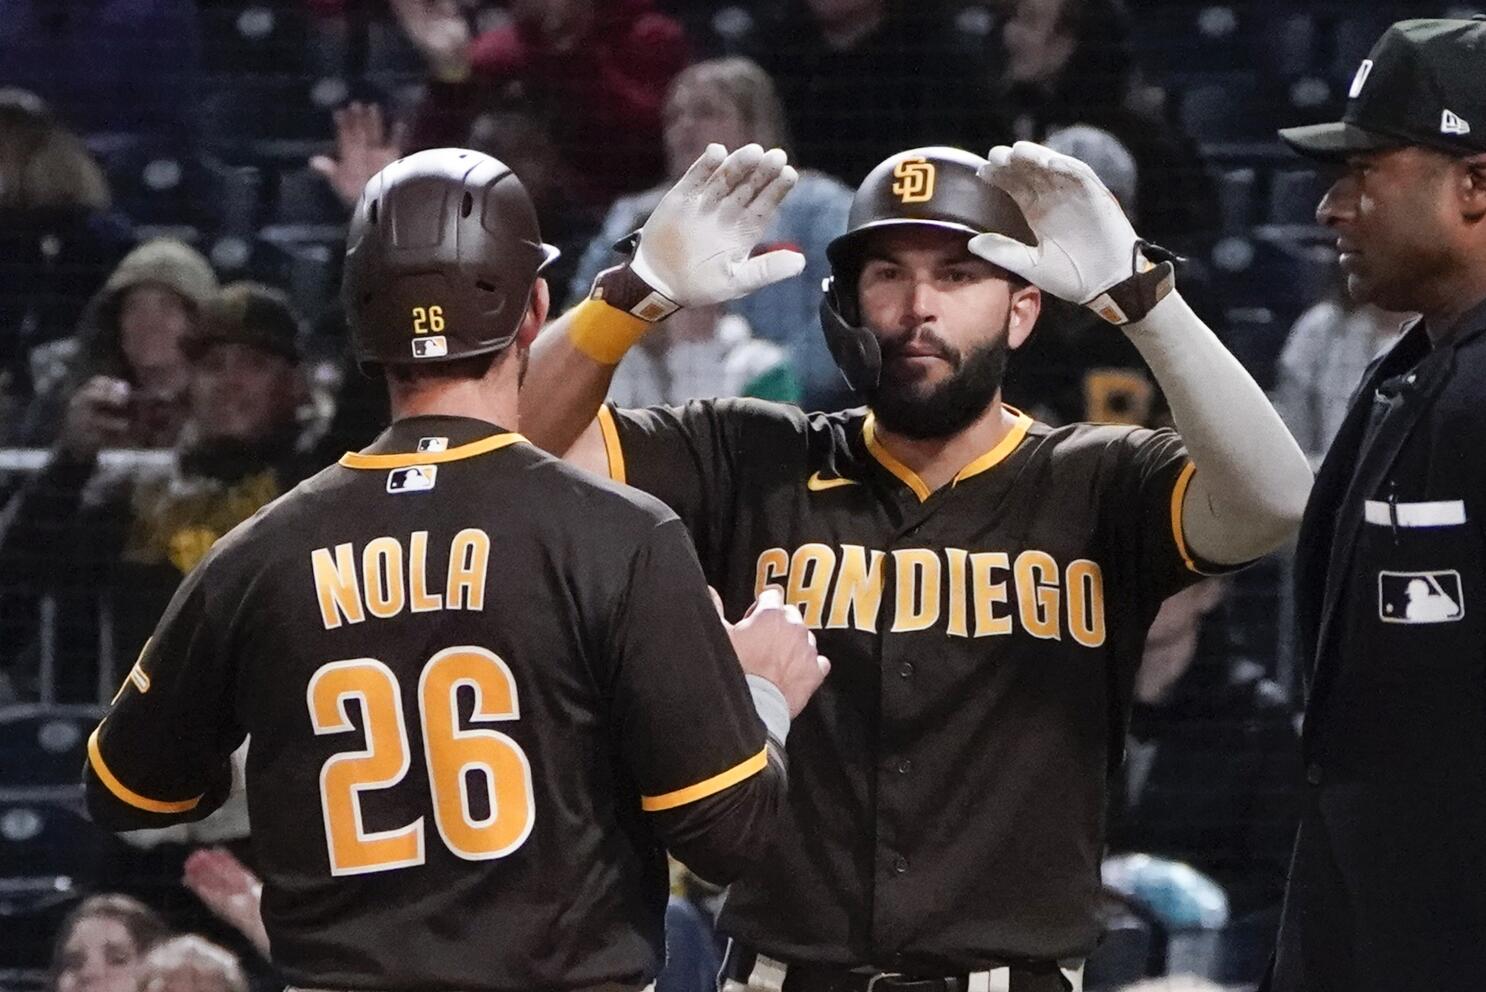 Perrotto: Who's On First Again a Major Pirates' Question